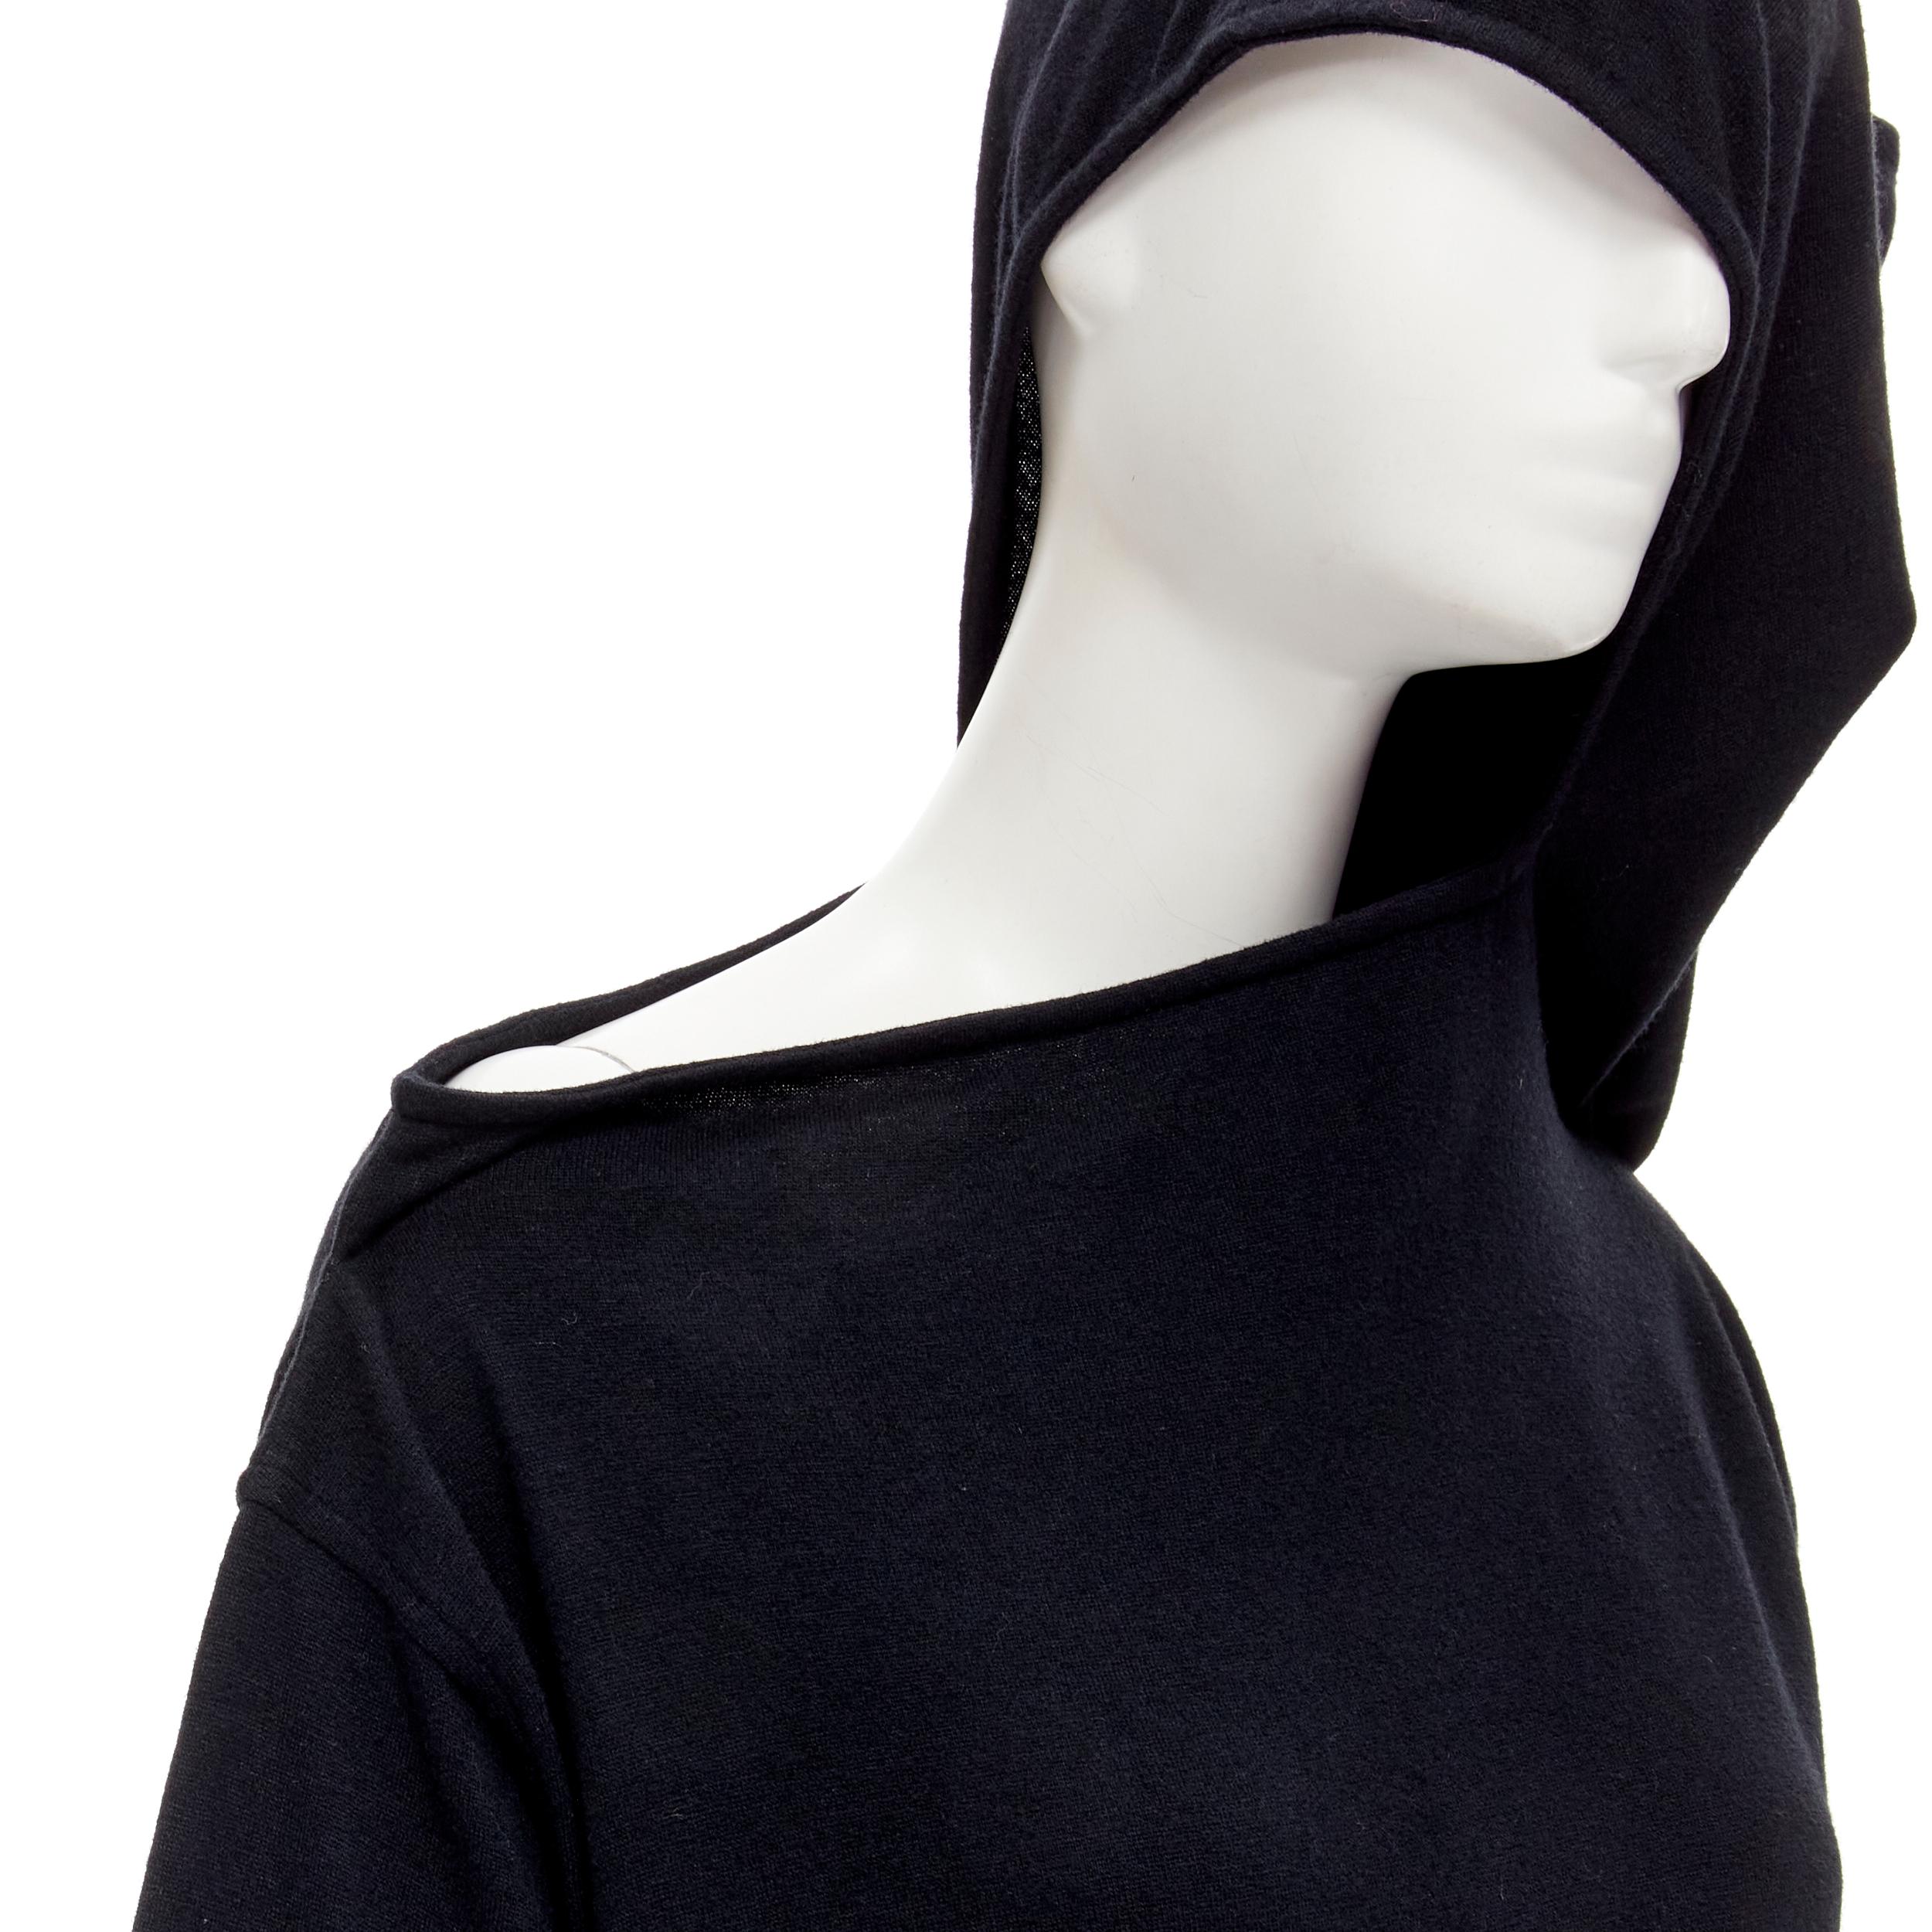 rare COMME DES GARCONS 1980's Vintage black asymmetric neckline hooded dress M 
Reference: CRTI/A00700 
Brand: Comme Des Garcons 
Designer: Rei Kawakubo 
Material: Feels like wool 
Color: Black 
Pattern: Solid 
Closure: Tie 
Extra Detail: Asymmetric